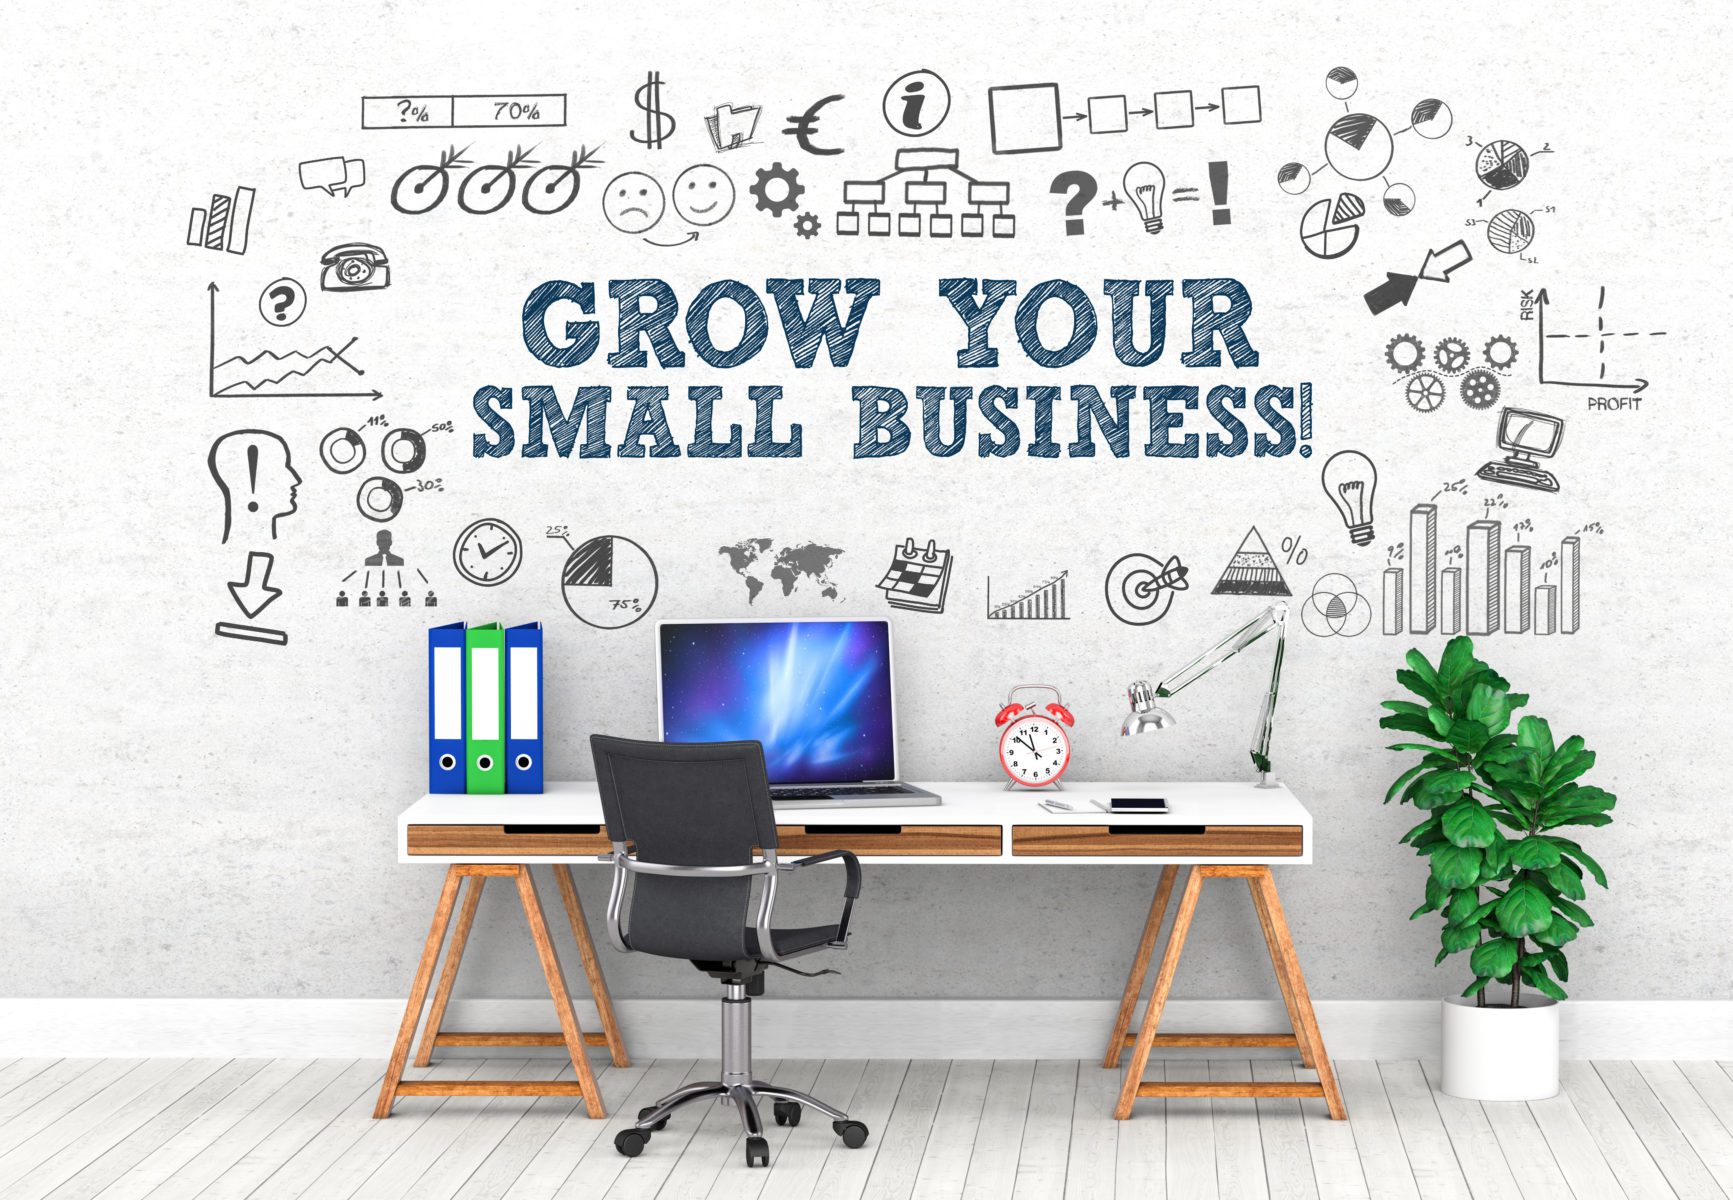 How Your Small Business Can Keep Up Online with Big Competitors